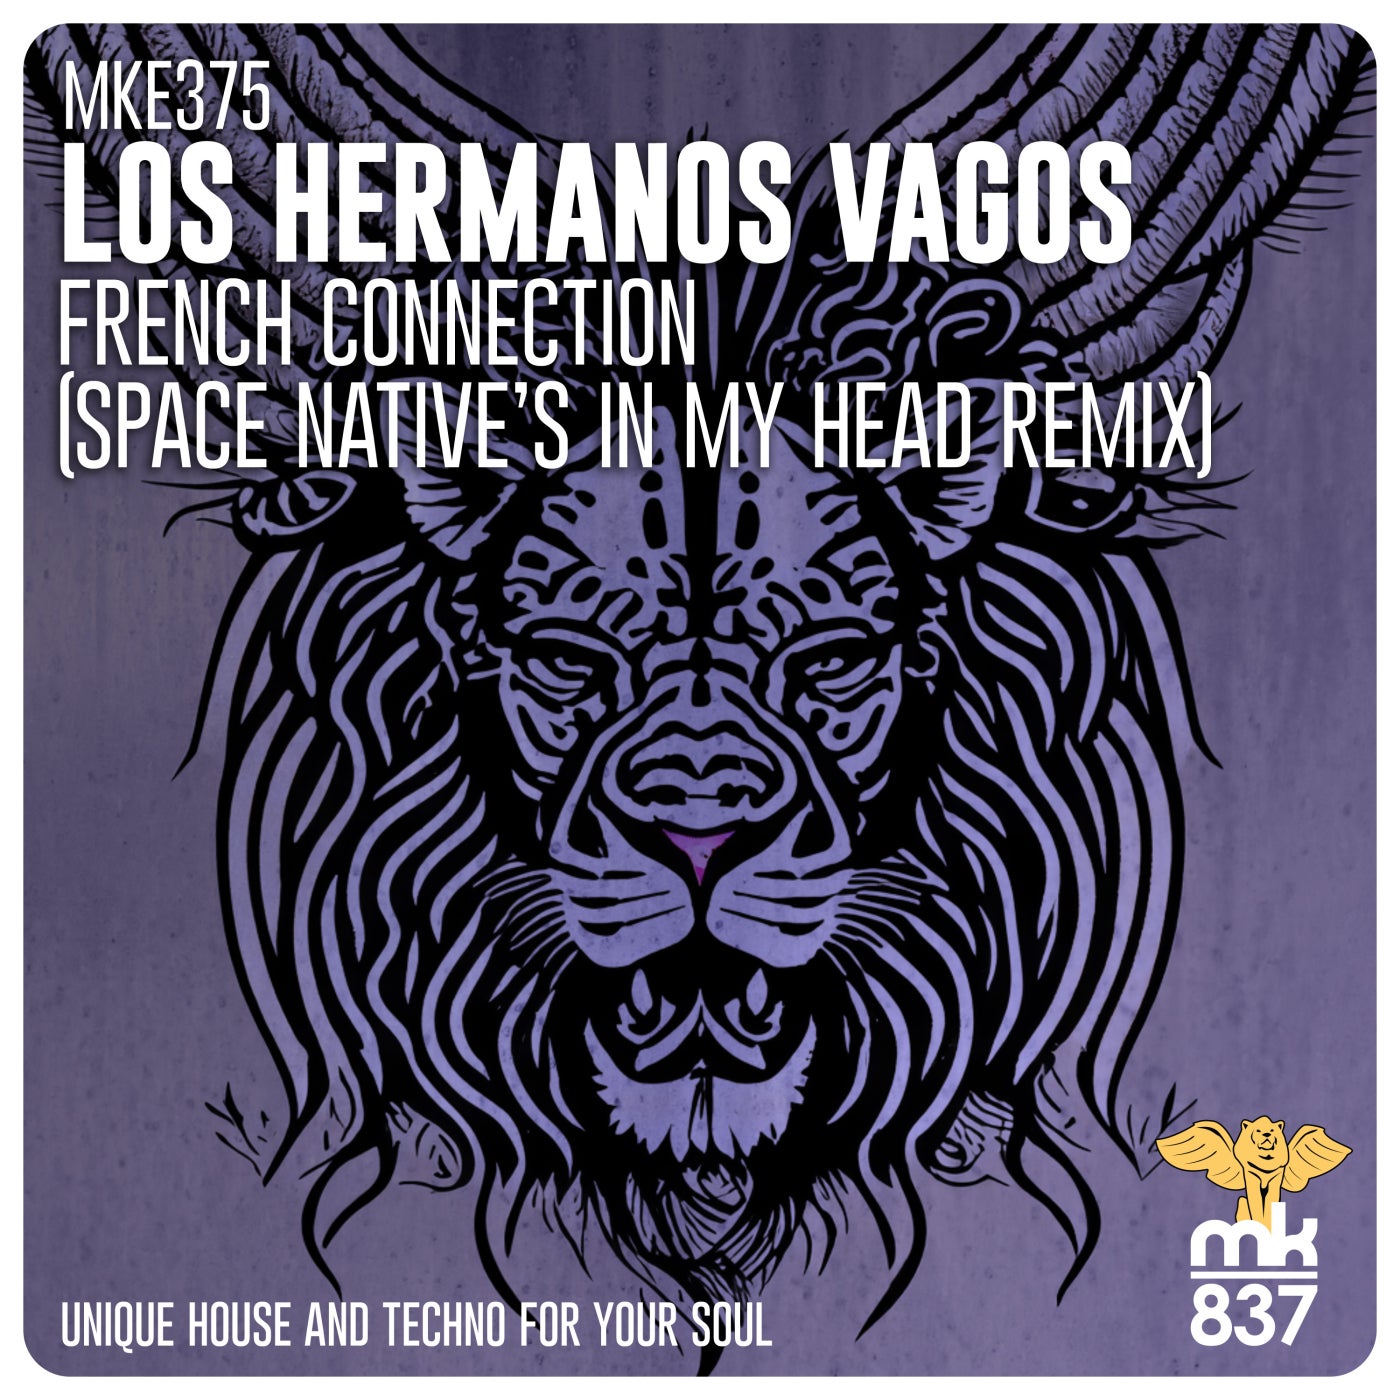 French Connection (Space Native's in My Head Remix)